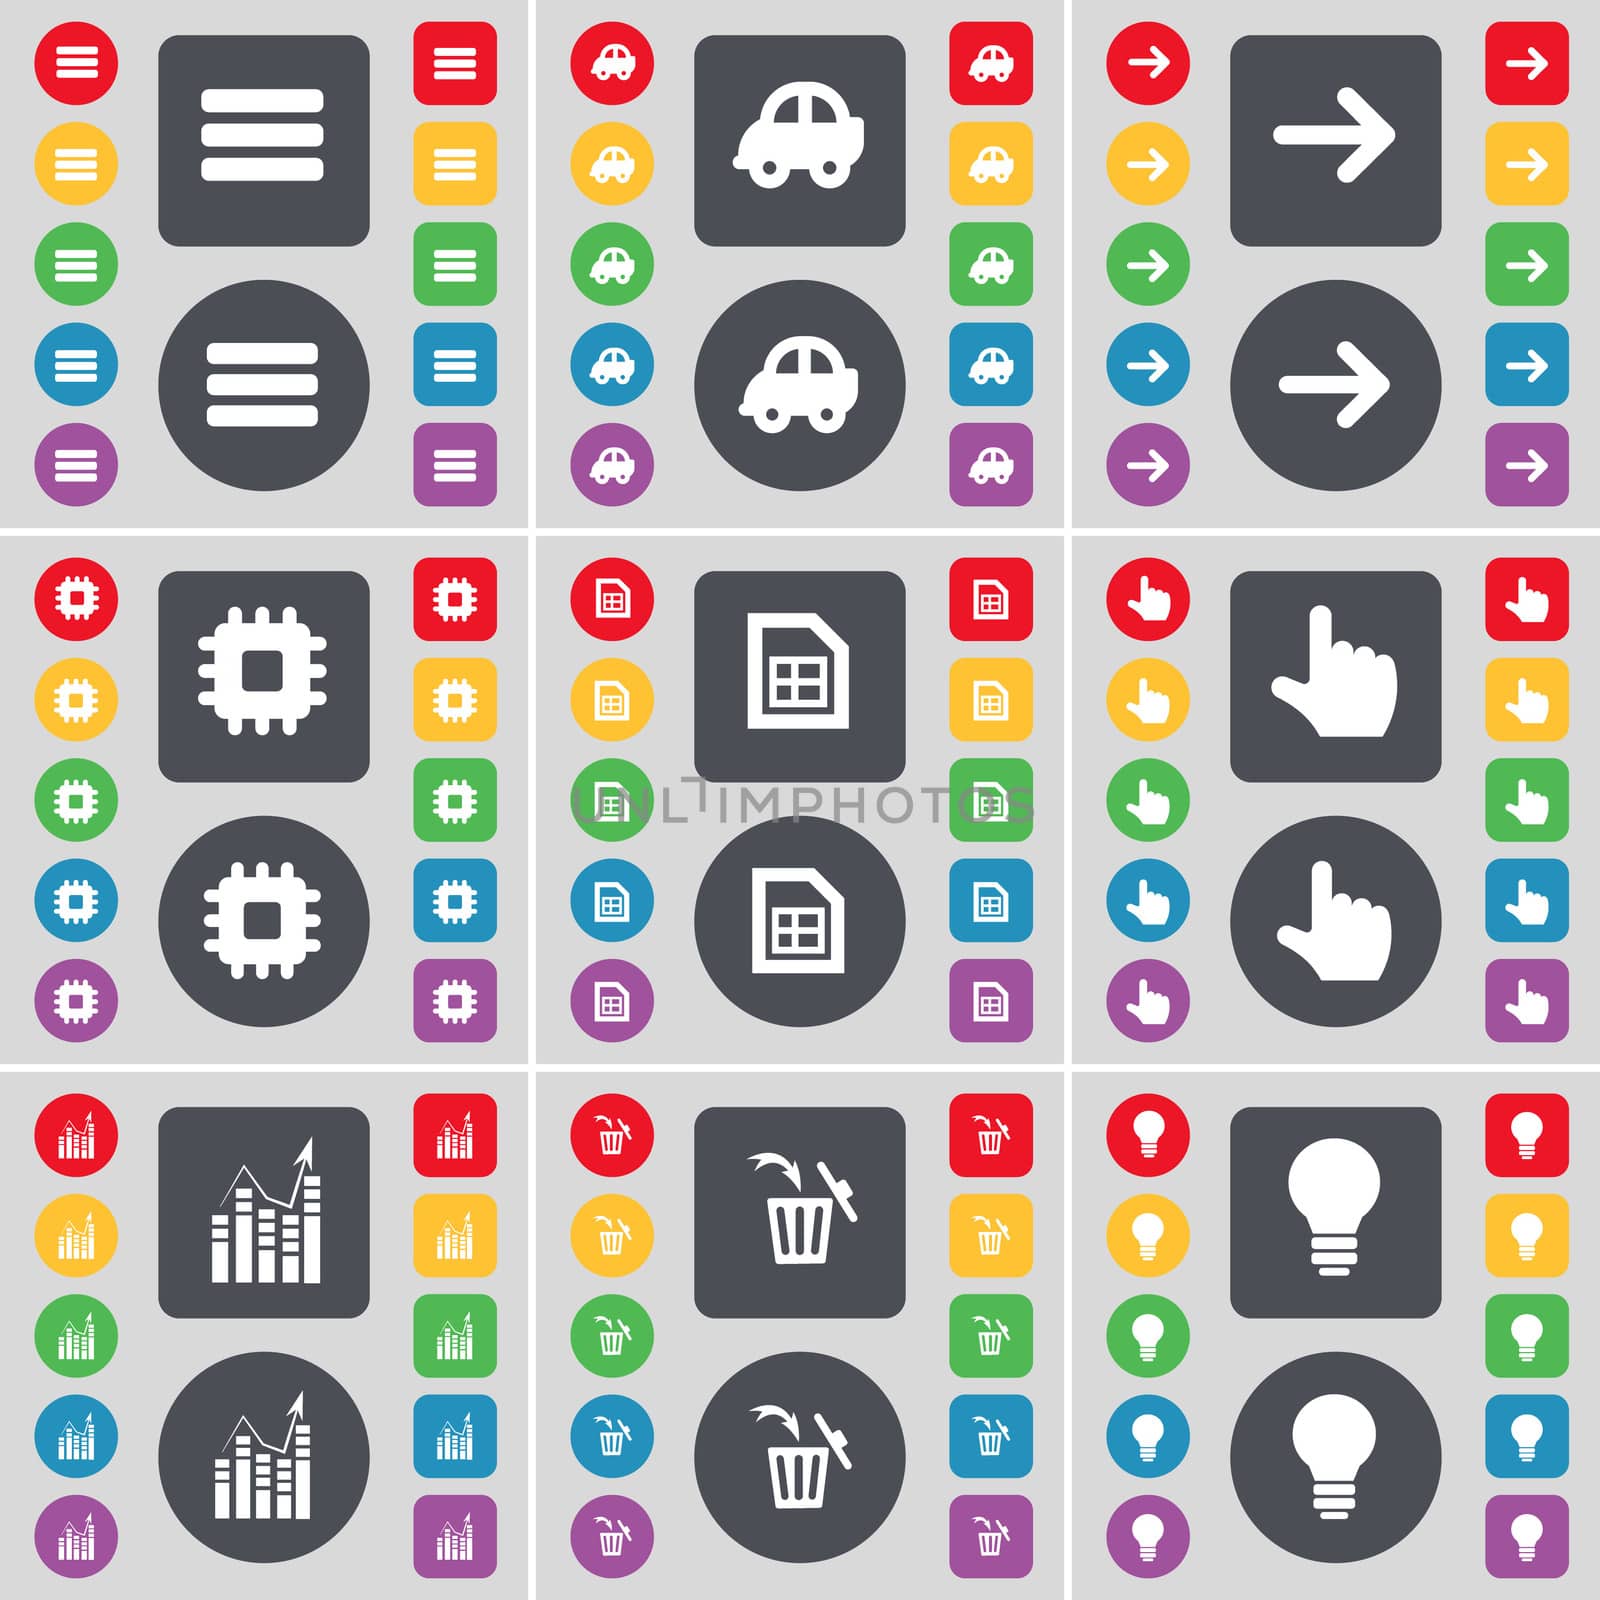 Apps, Car, Arrow right, Processor, File, Hand, Graph, Trash can, Light bulb icon symbol. A large set of flat, colored buttons for your design. illustration